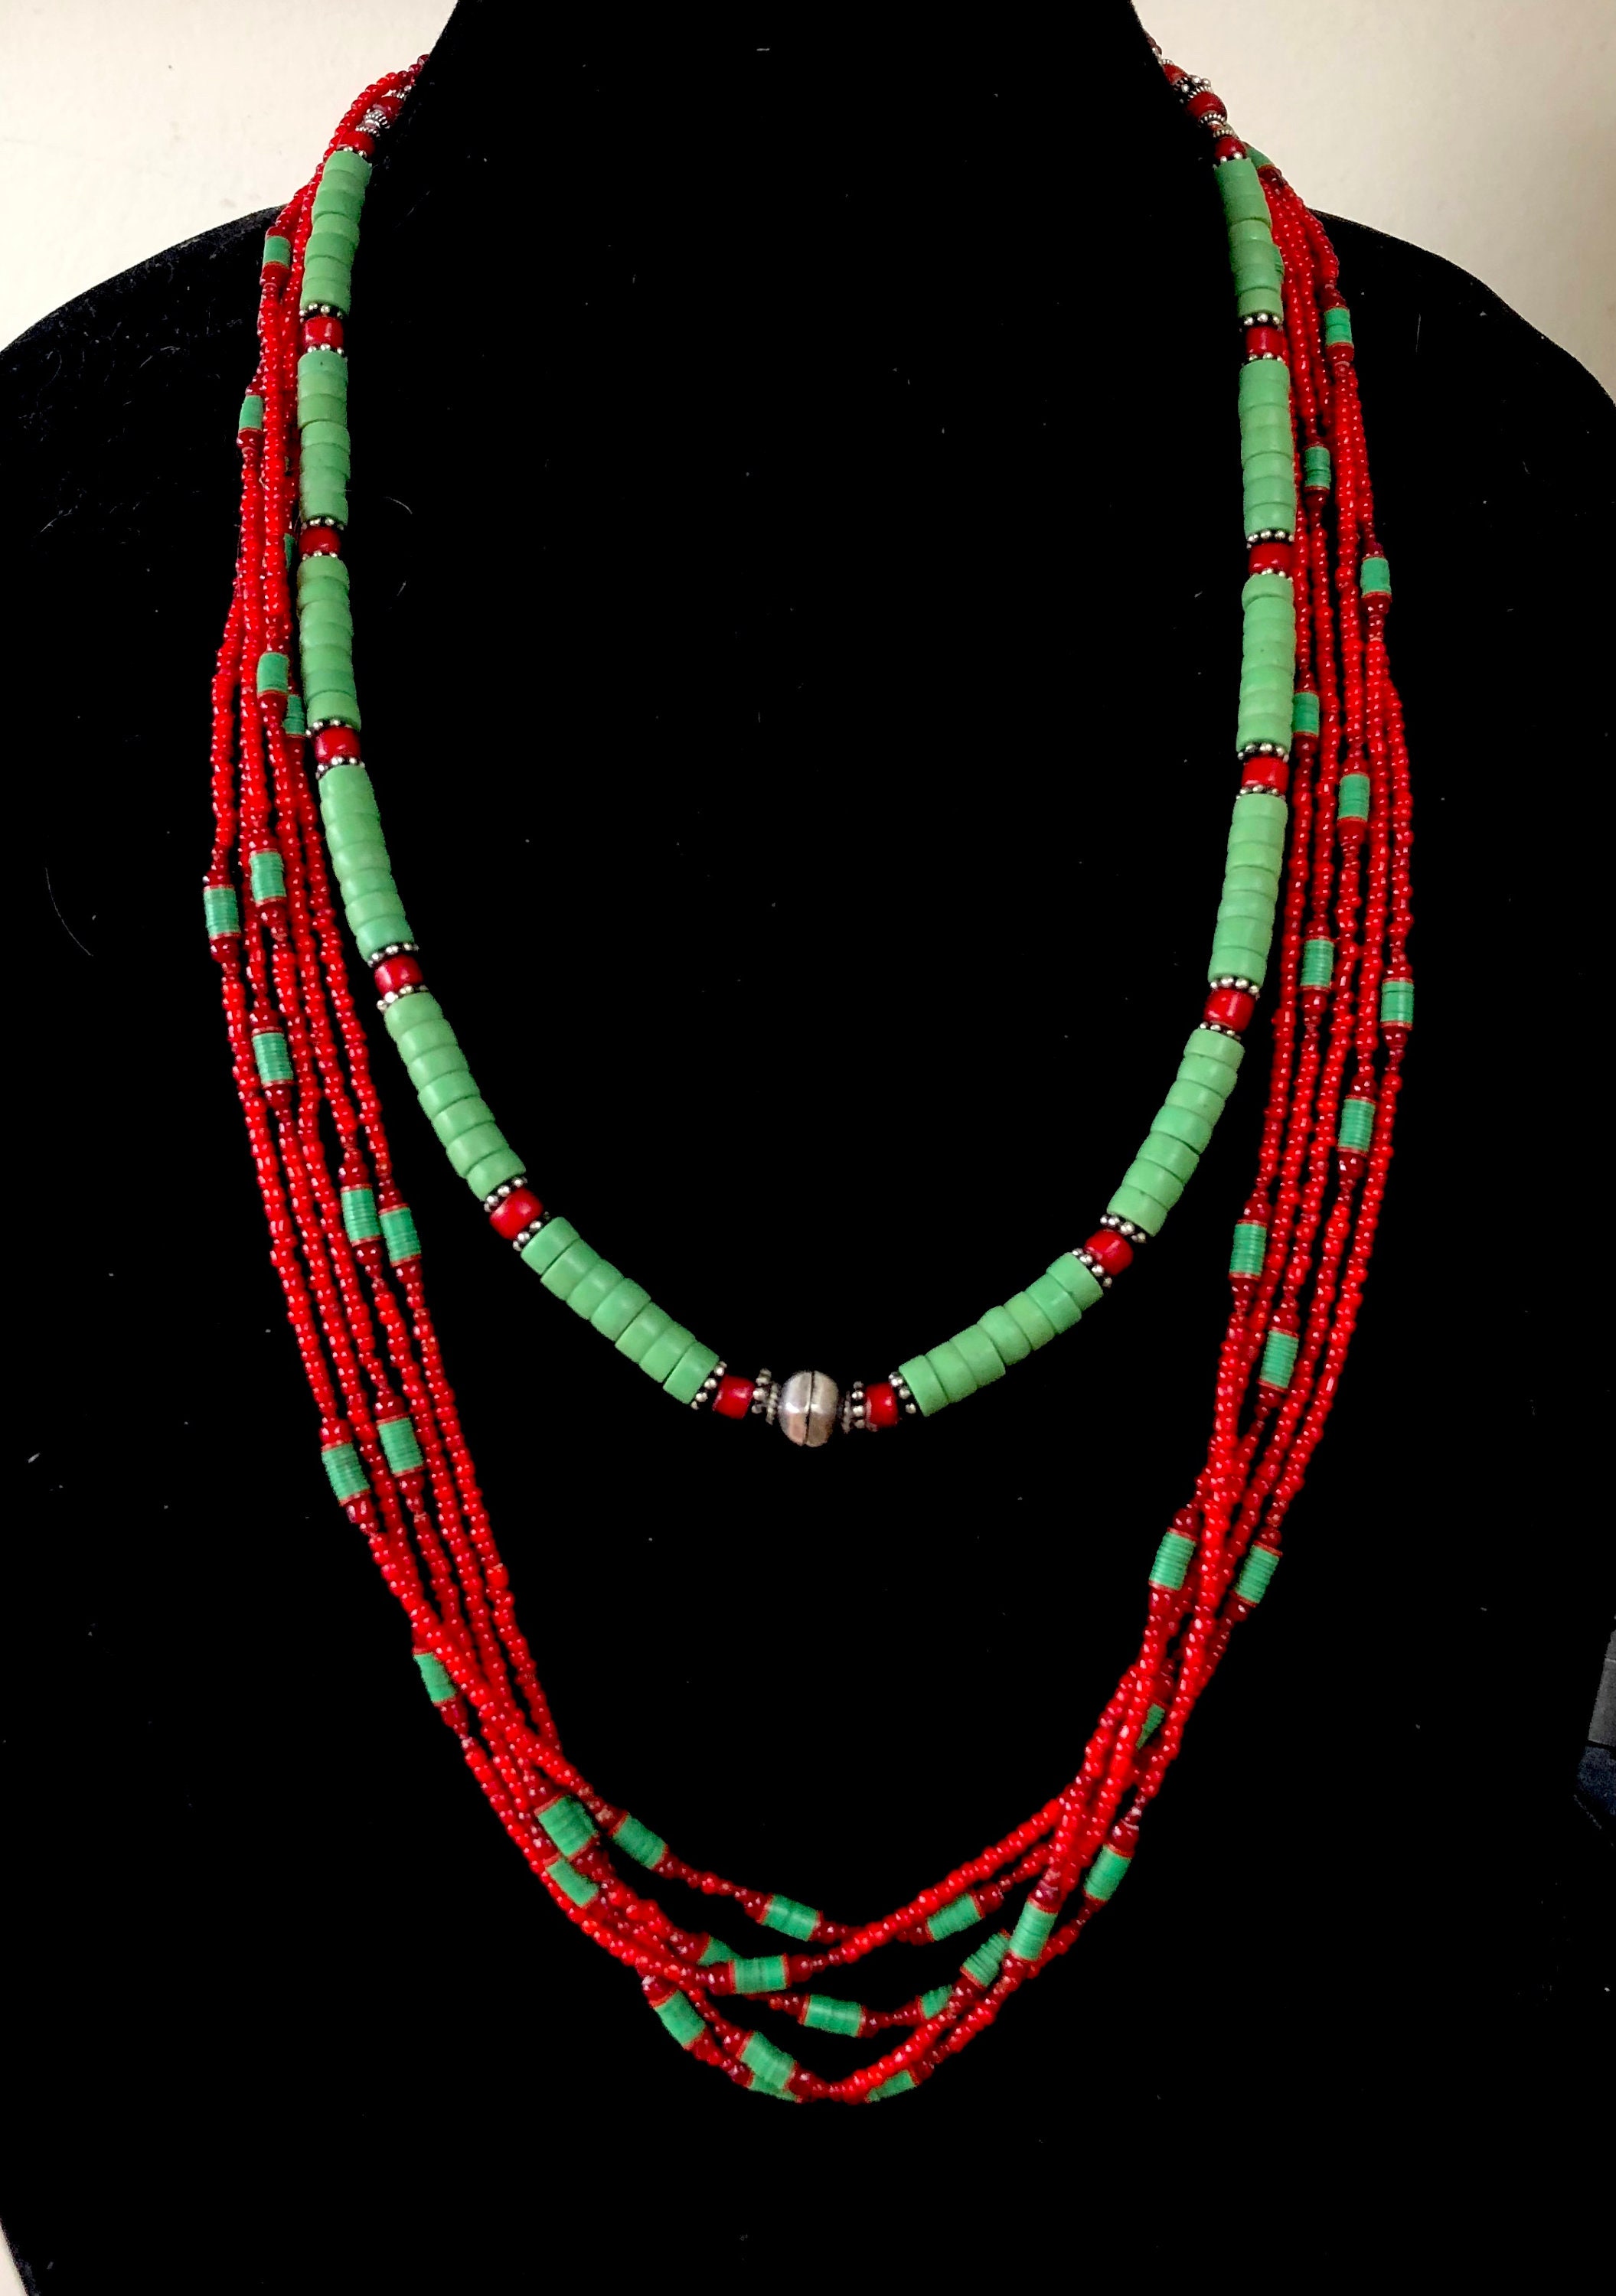 Single strand necklace of Pistachio Green Java French Cross Beads, mixed  with antique, beautiful Venetian red skunk trade beads, Ethiopian etched  metal beads, and bone beads.